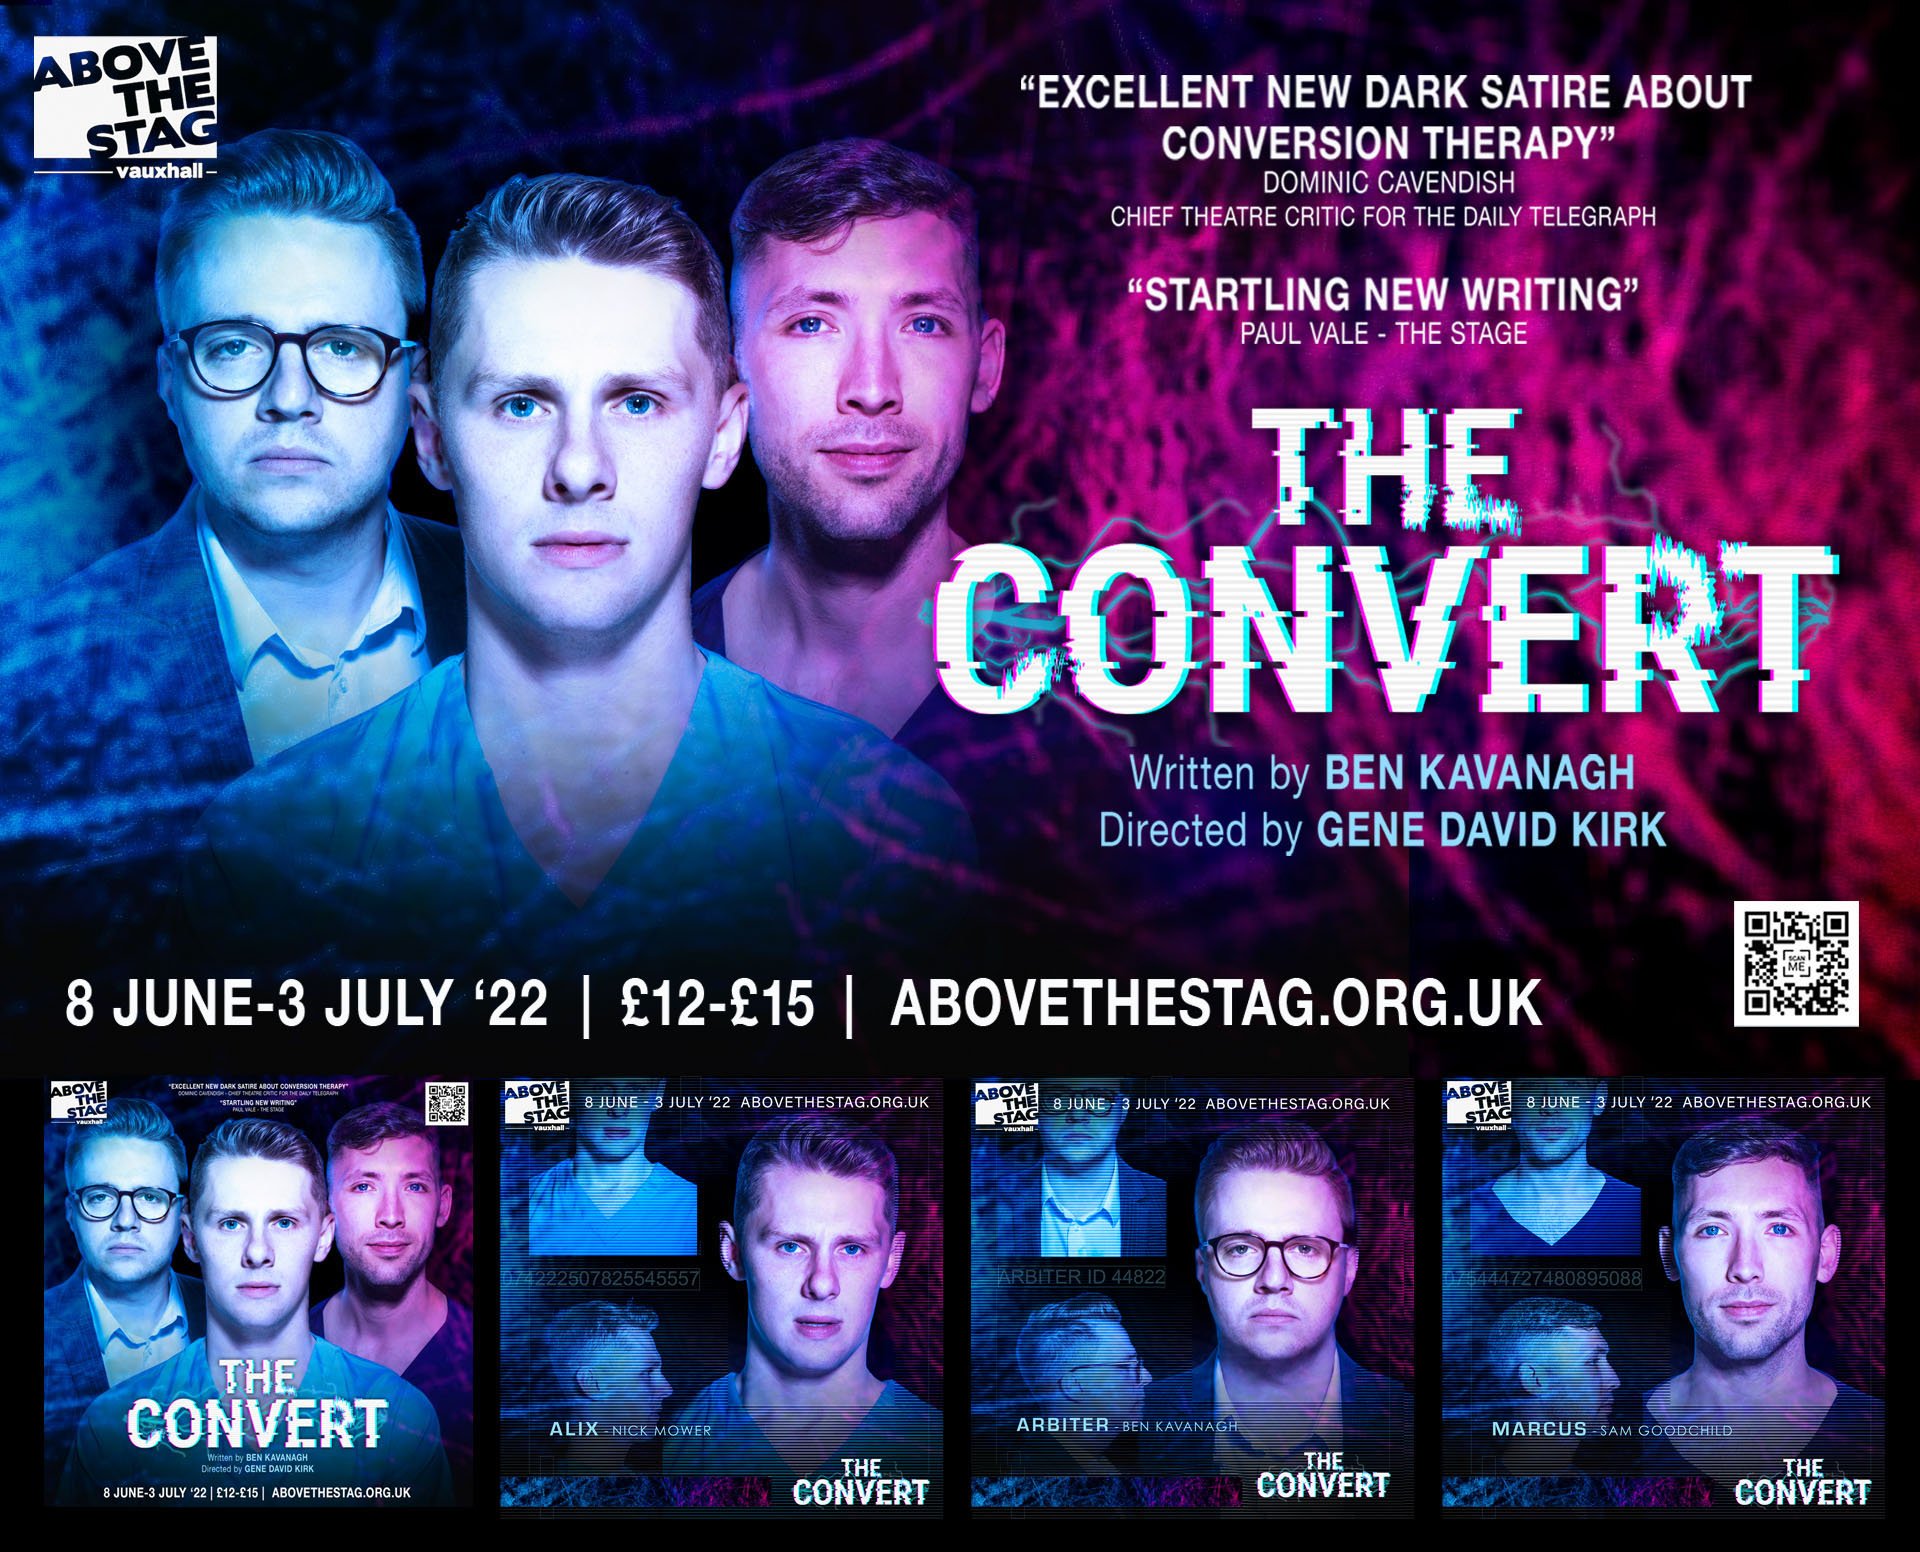 Promo Images for The Convert (ATS theatre)